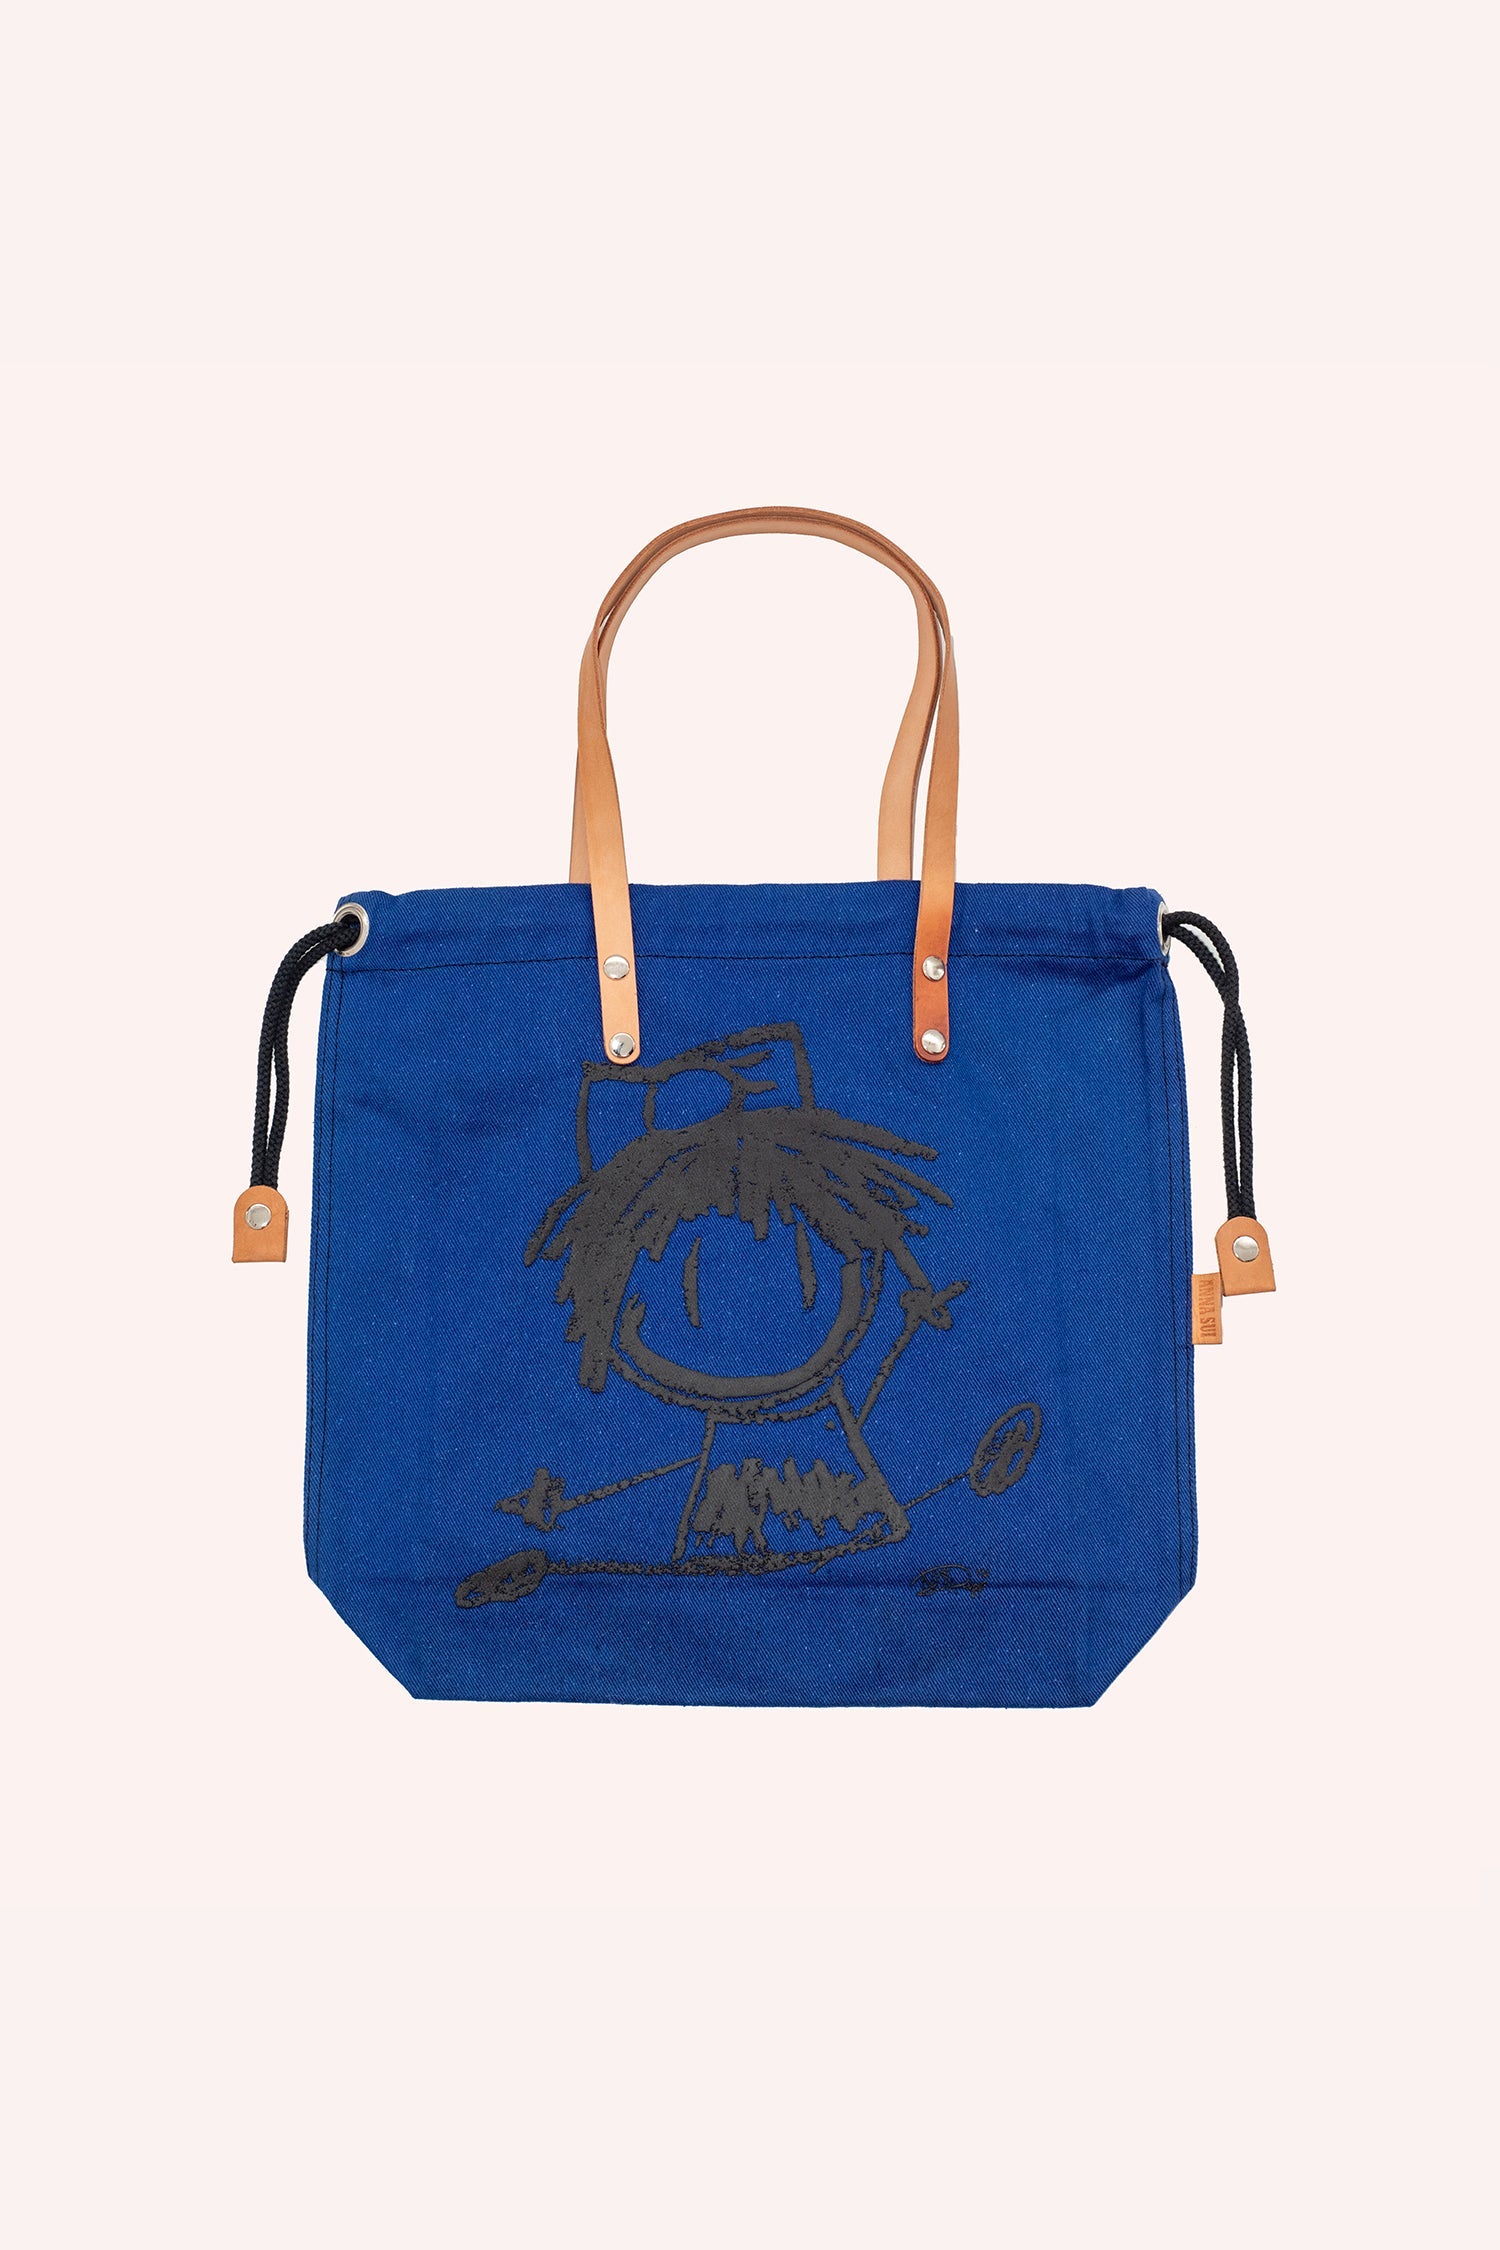 Tote bag, navy blue squared shape, brown handles, black laces to closed, Ali Rapp artwork a grey Happy girl 